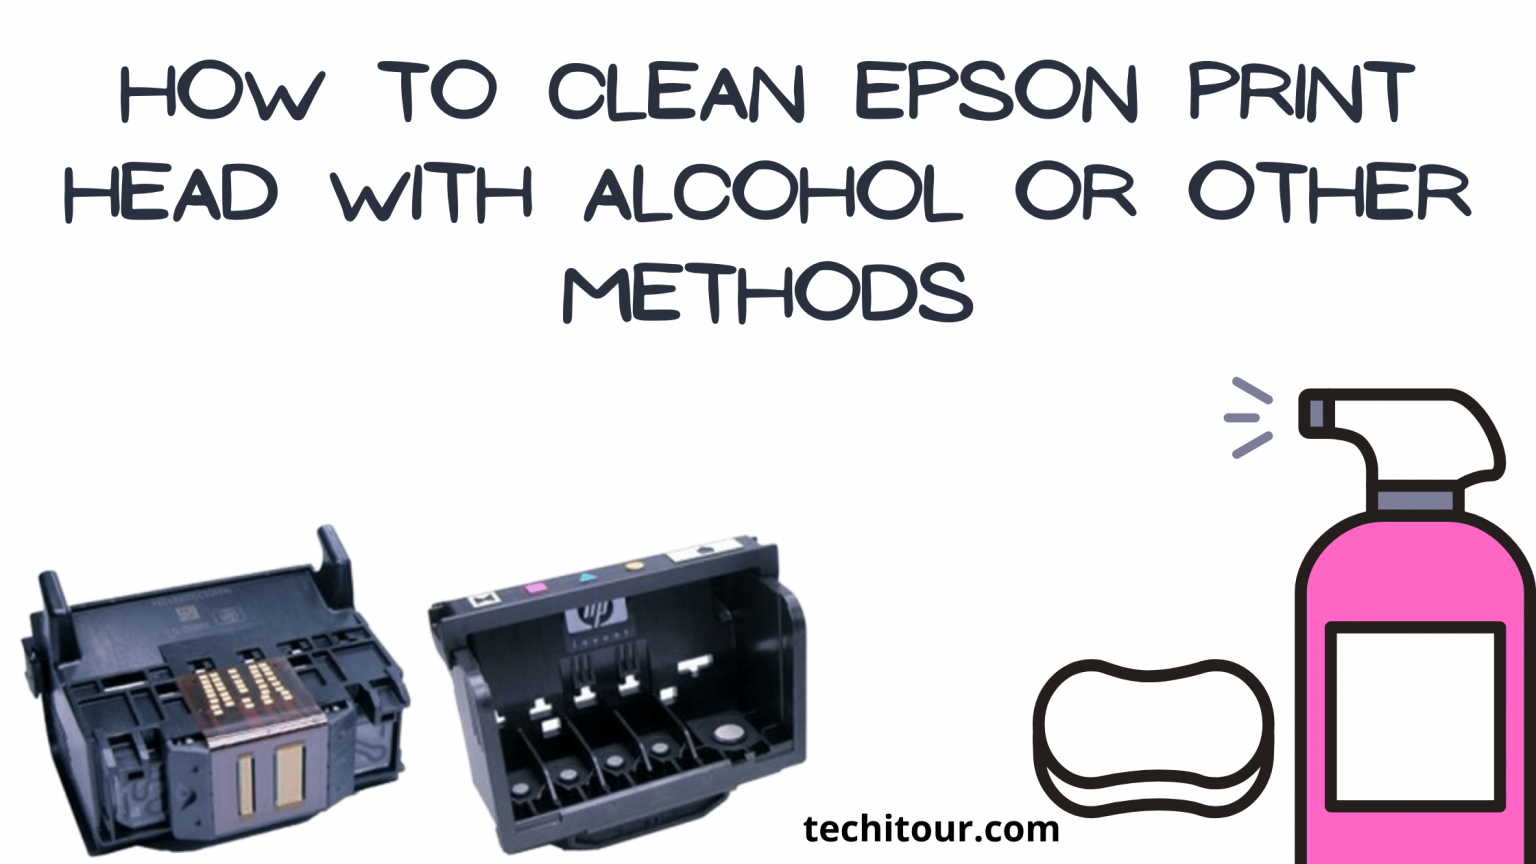 How To Clean Epson Print Head With Alcohol Or Other Methods 8588